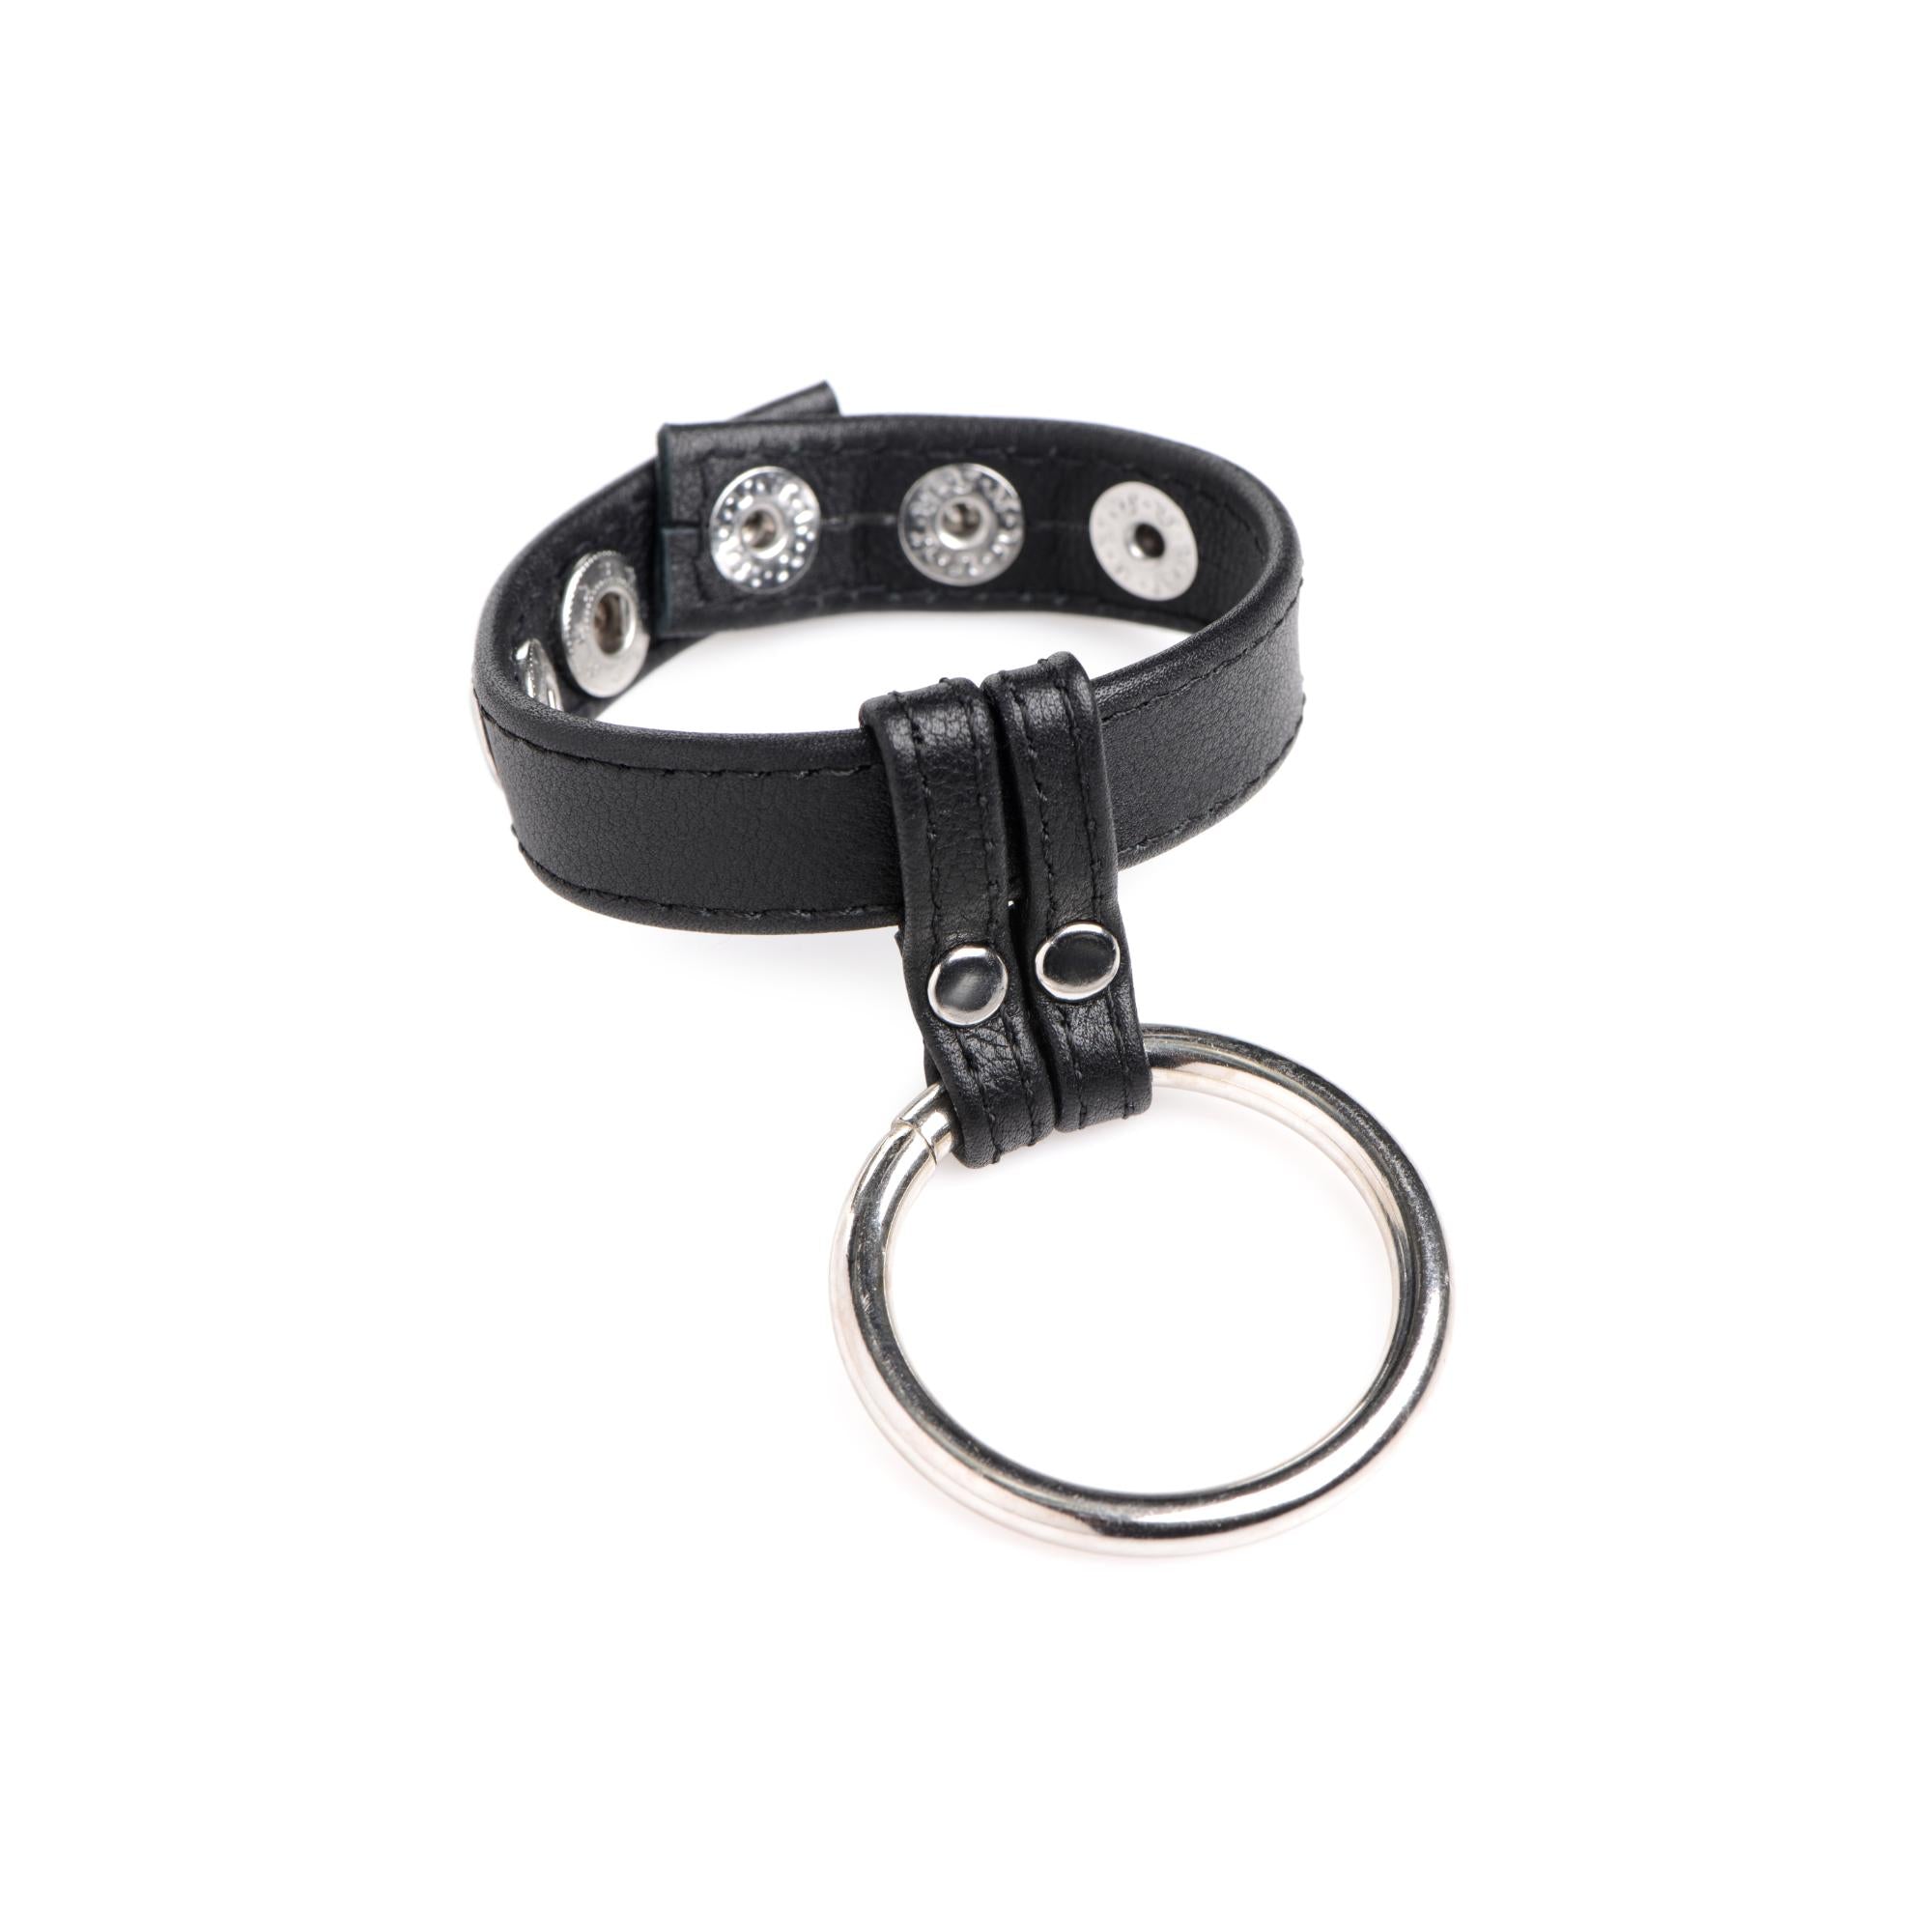 Strict Leather Cock Gear Leather and Steel Cock & Ball Ring